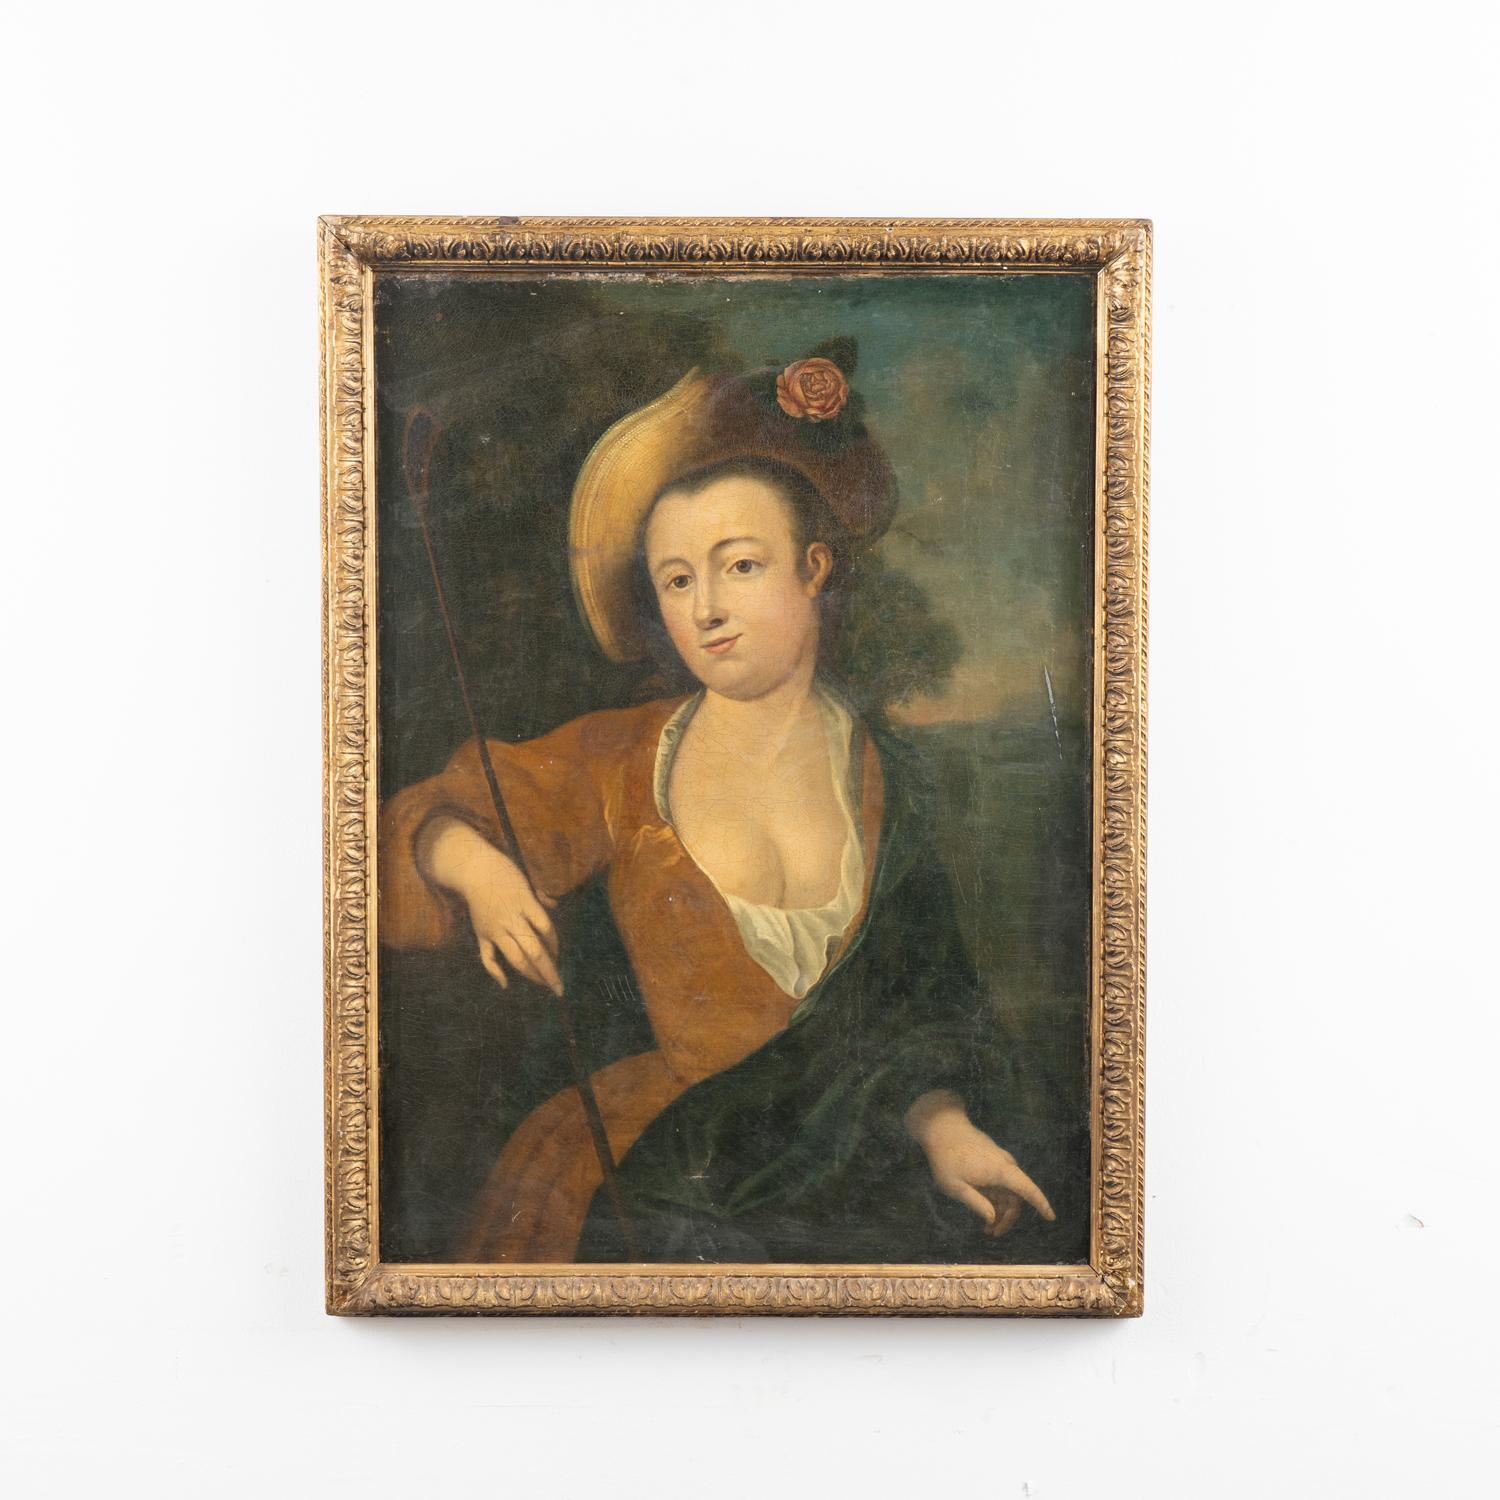 Original oil on canvas portrait of a lady with hat and riding crop.
Unknown artist, circa 1700's.
Major wear, craquelure throughout. Stains, paint loss, scratches.
Typical age related nicks, scratches, abrasions to painted frame. 
Measurements taken